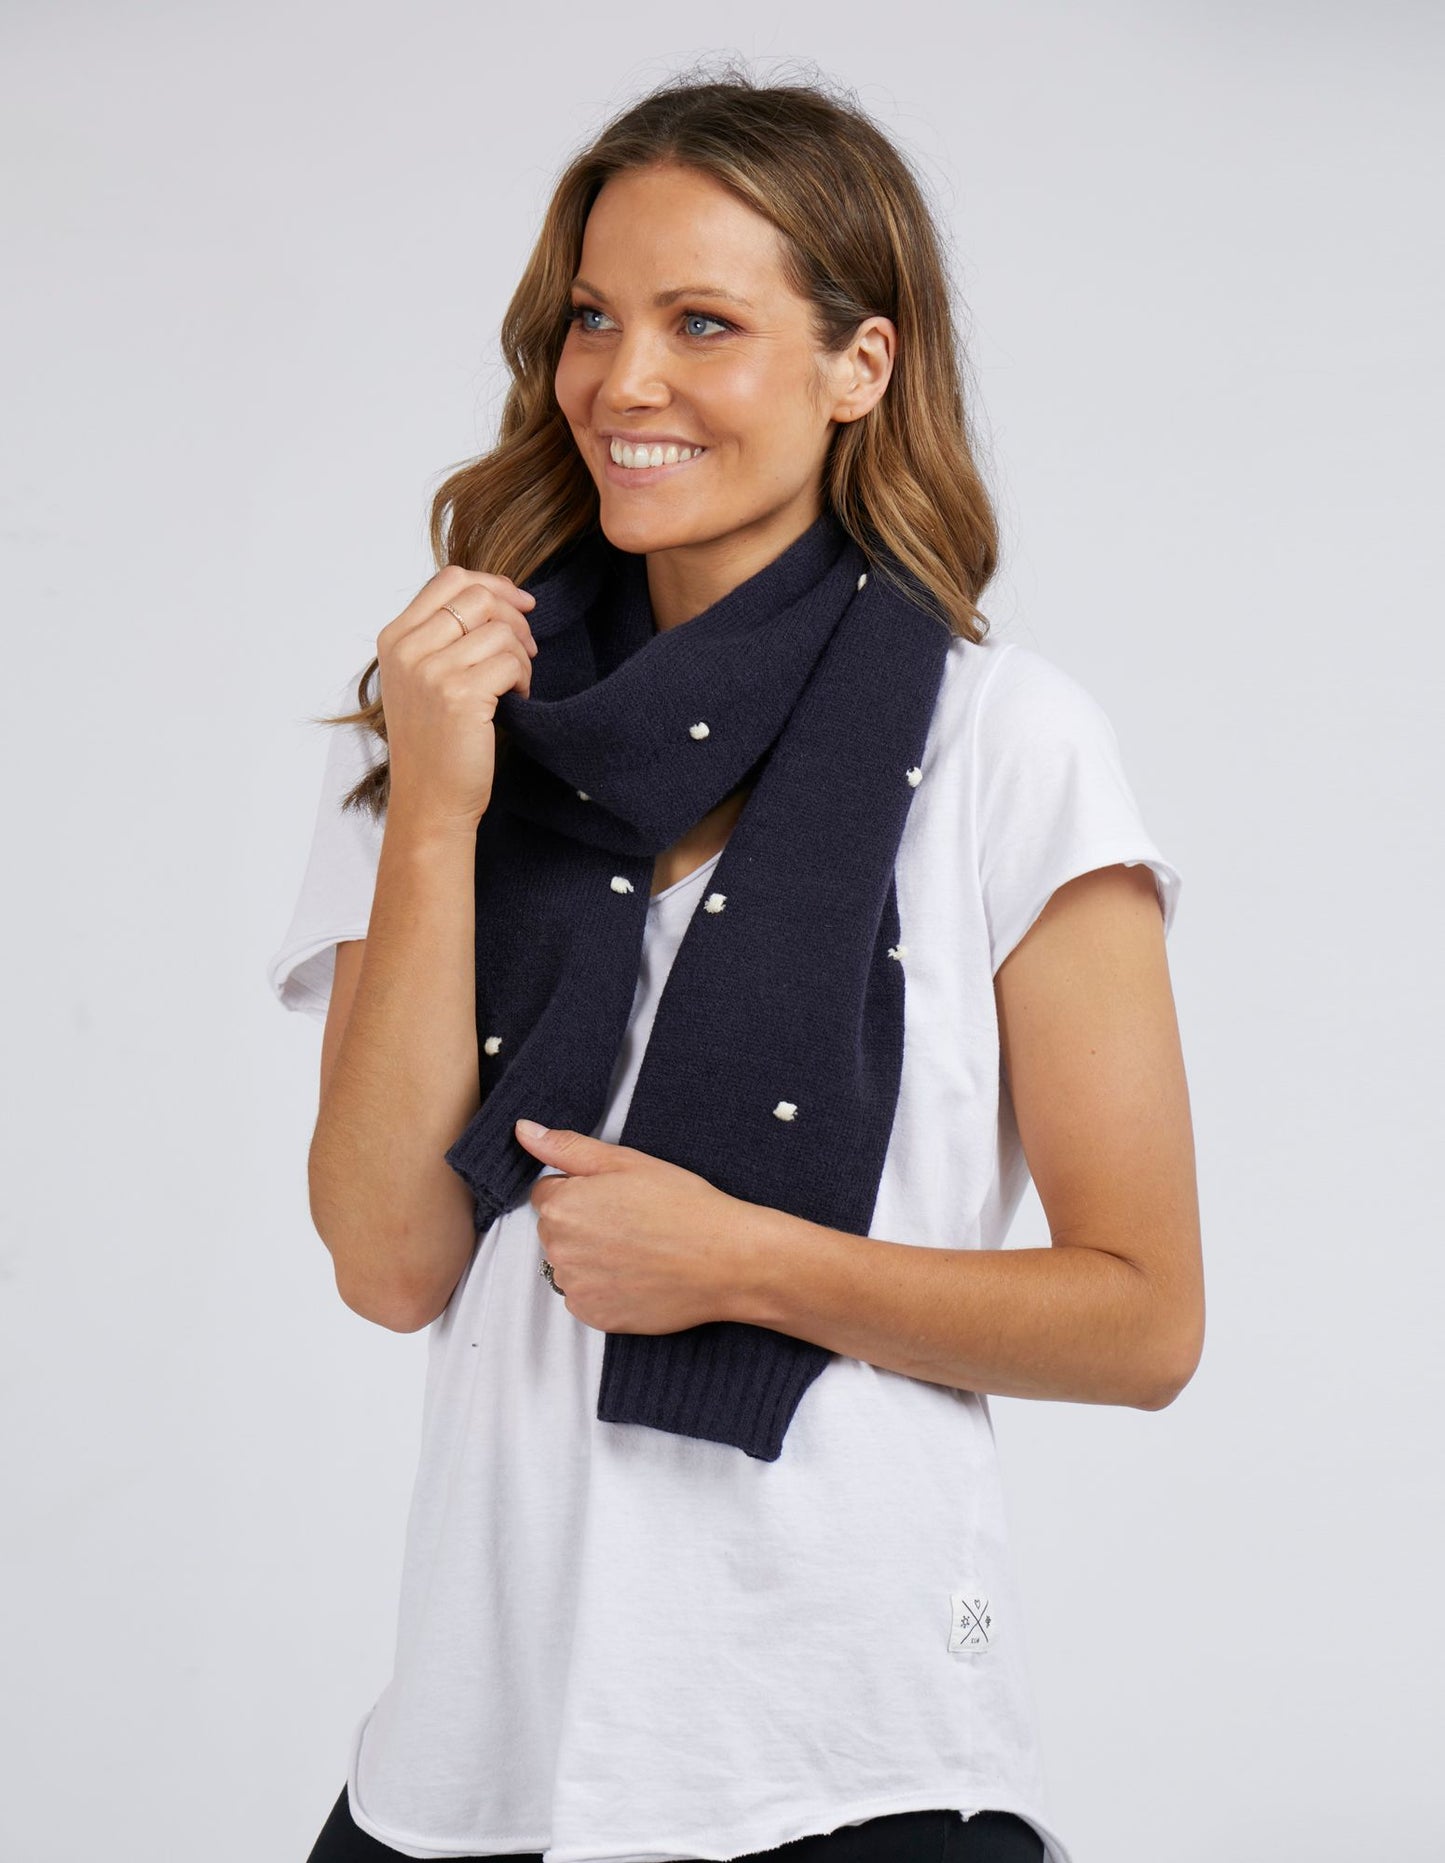 Dotty Scarf - Navy - Elm Lifestyle - FUDGE Gifts Home Lifestyle